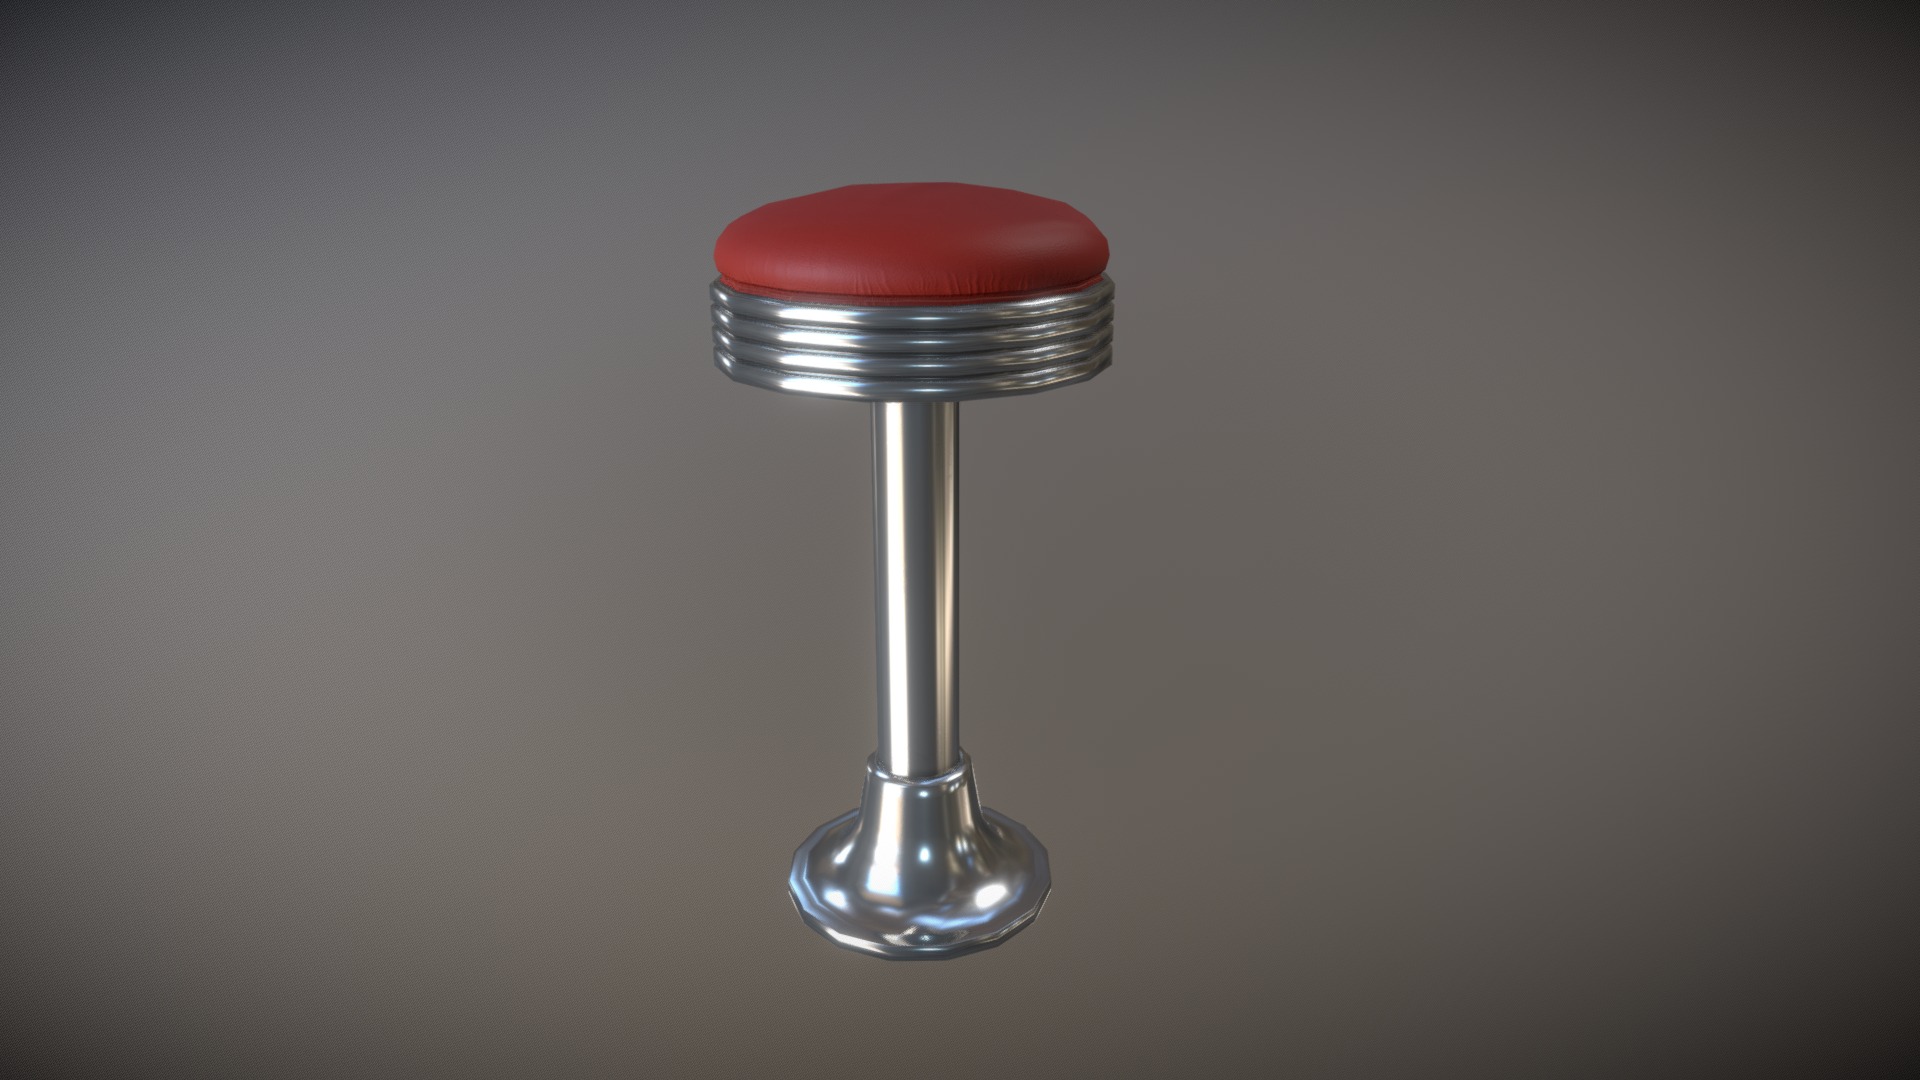 3D model Retro Stool - This is a 3D model of the Retro Stool. The 3D model is about a silver and red metal object.